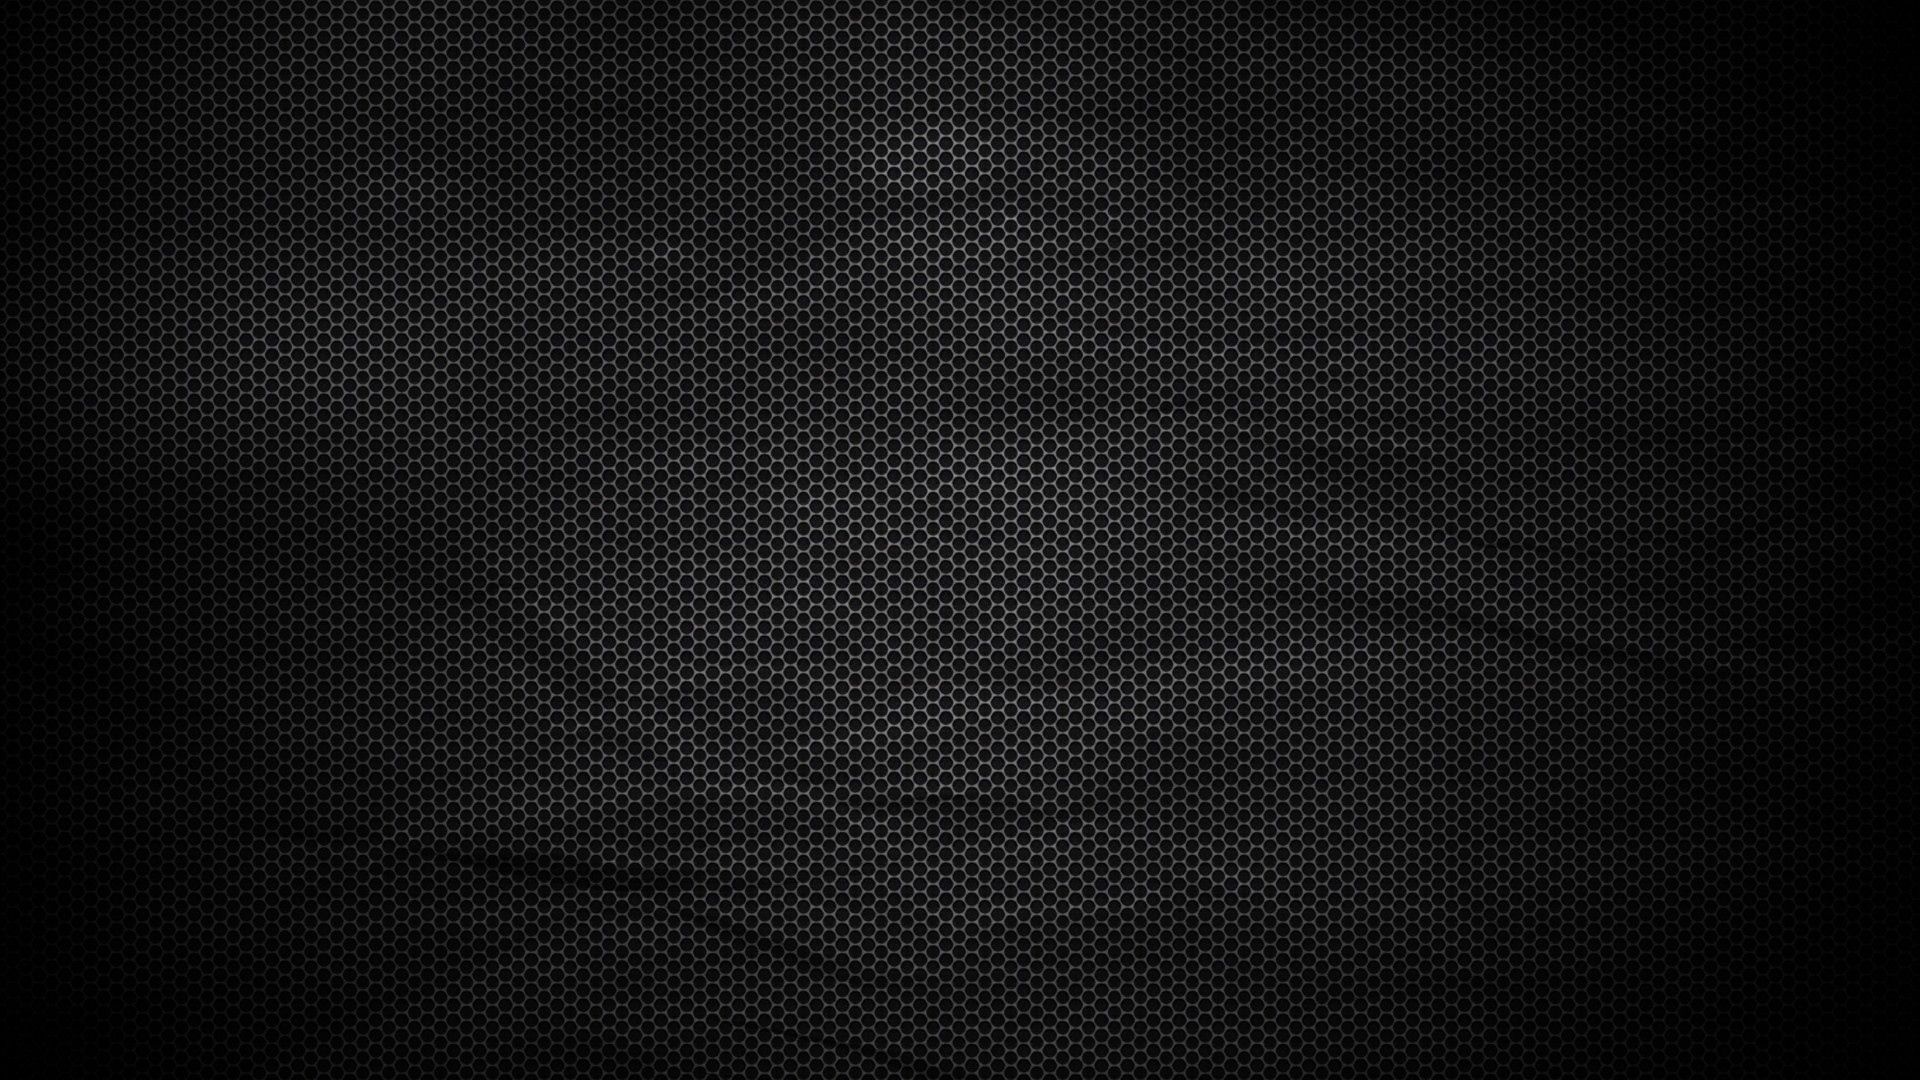 56326 download wallpaper lines, textures, background, dark, circles, texture, dimensions (edit), dimension screensavers and pictures for free